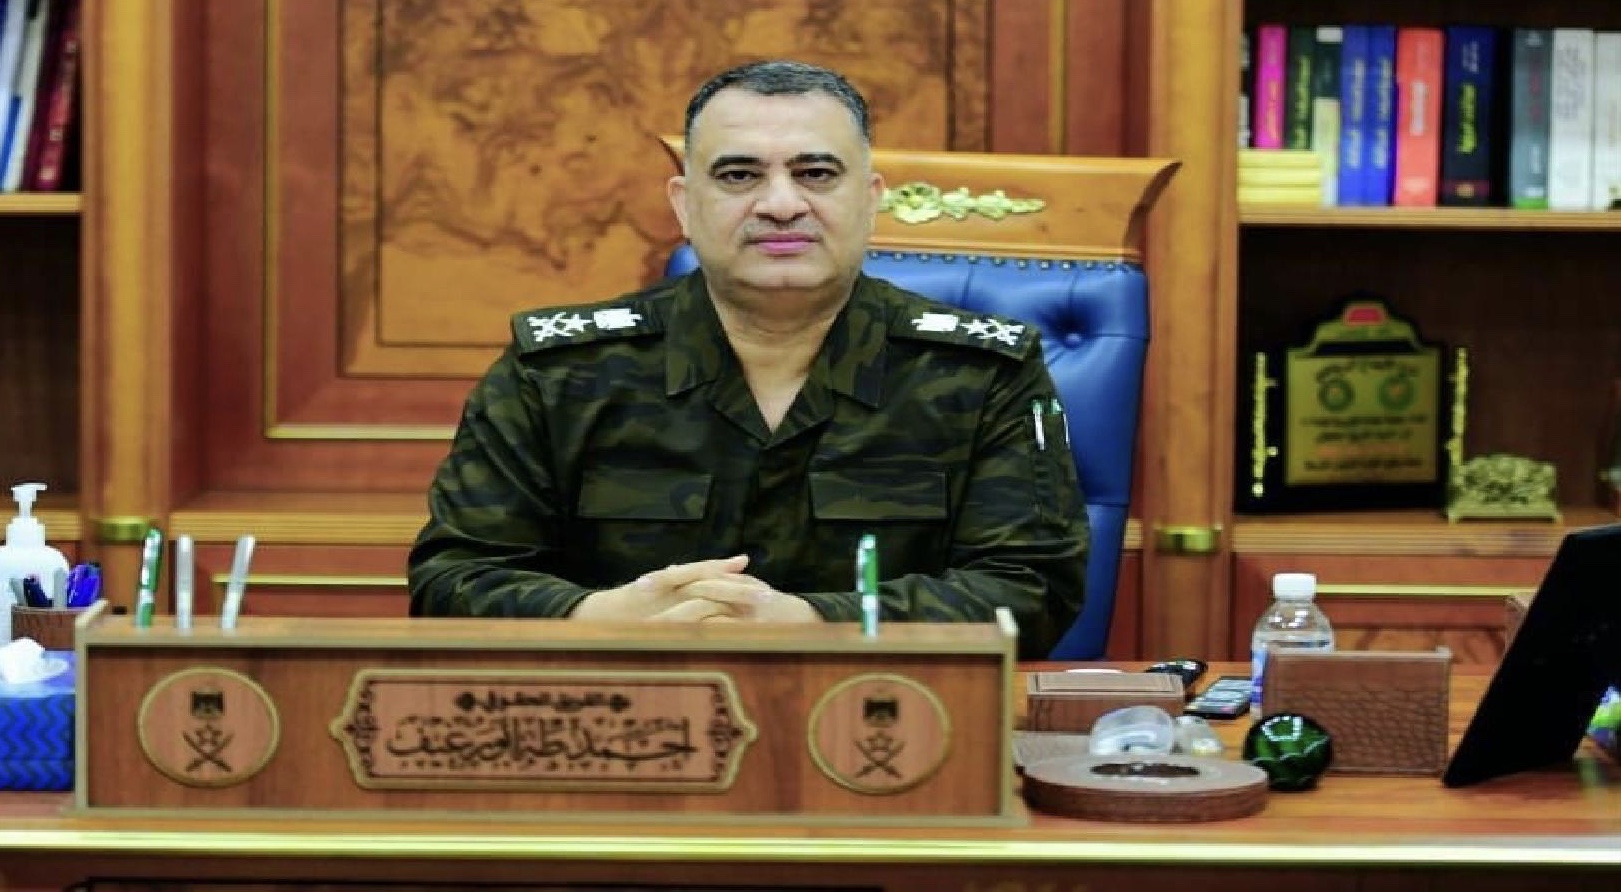 Person arrested for impersonating Lieutenant-General Ahmed Abu Ragheef